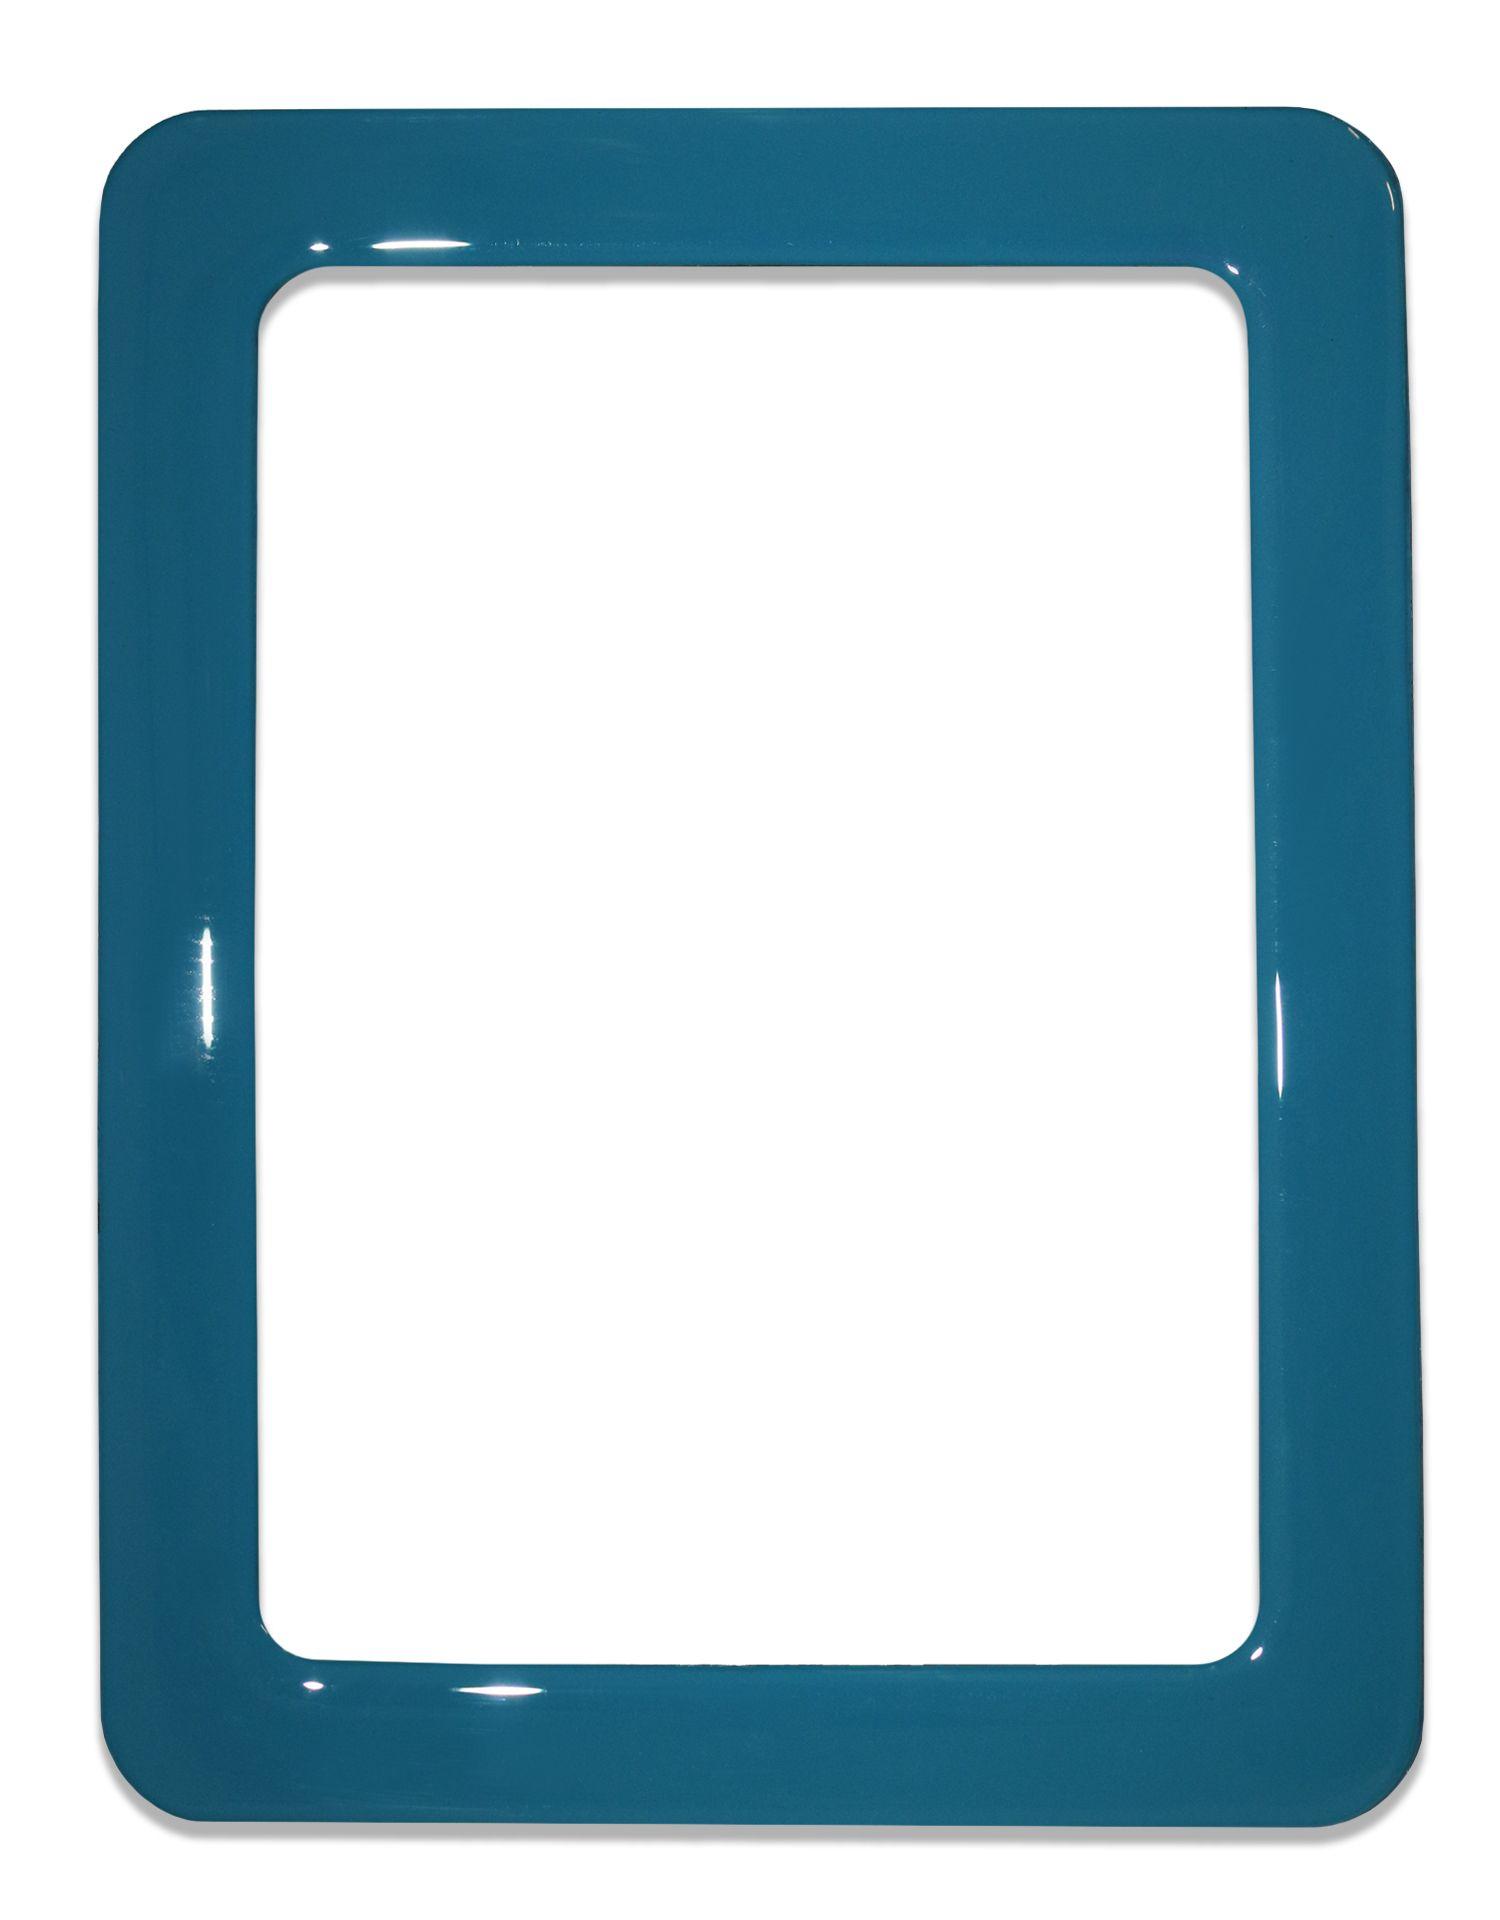 Magnetic self-adhesive frame size 16.0x11.8cm - turquoise